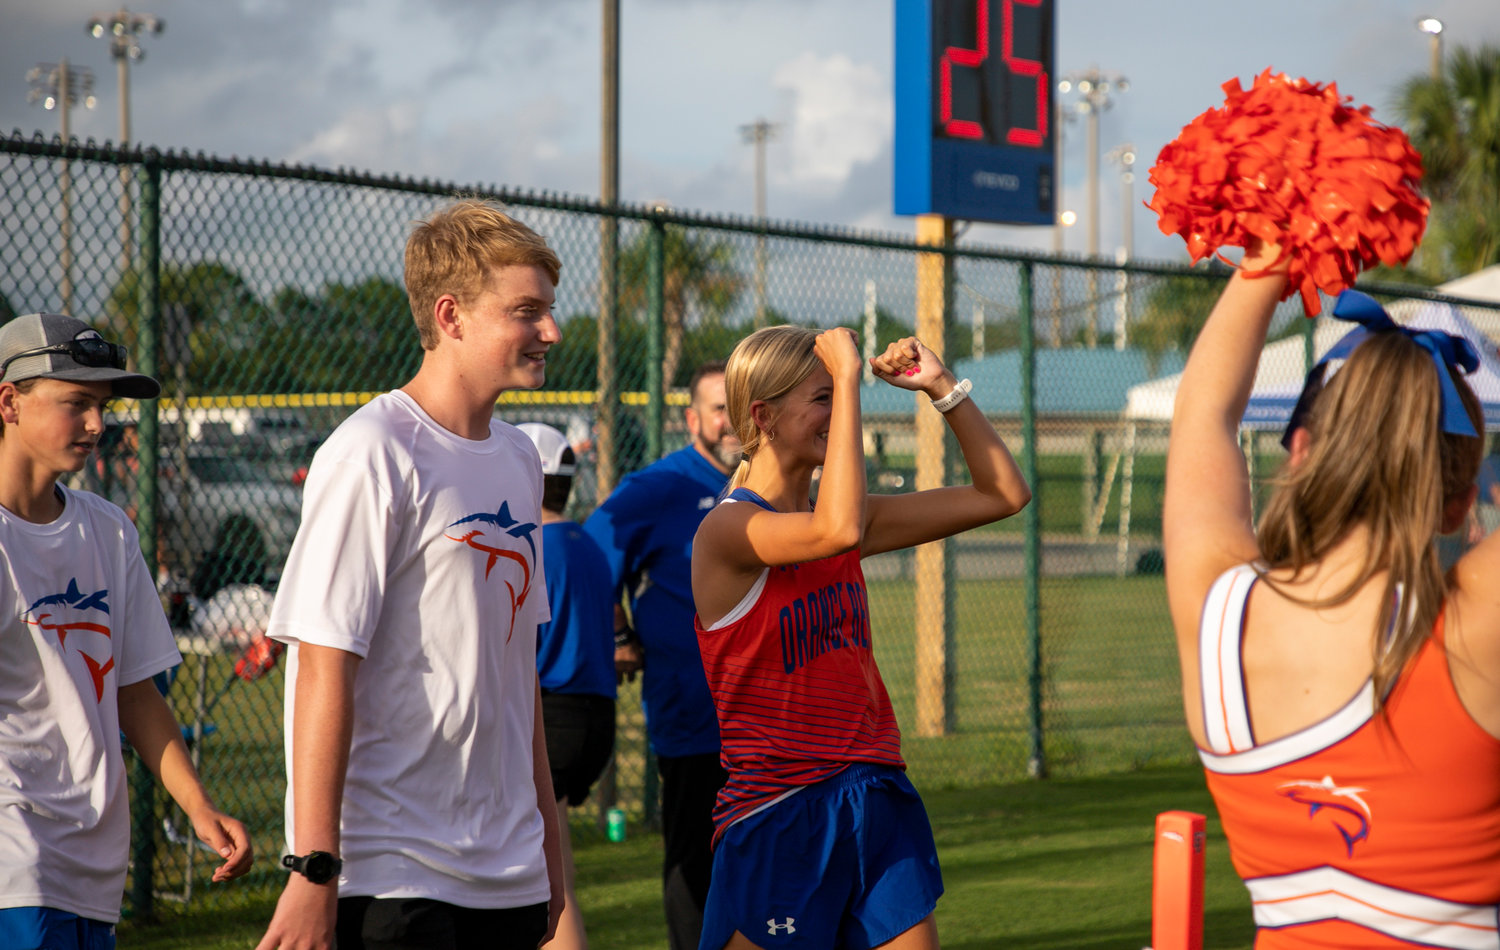 The Mako cross country team kicked off the 2022 fall sports seasons at the Sportsplex last Friday night and were introduced to the Orange Beach community at the Meet the Makos event.